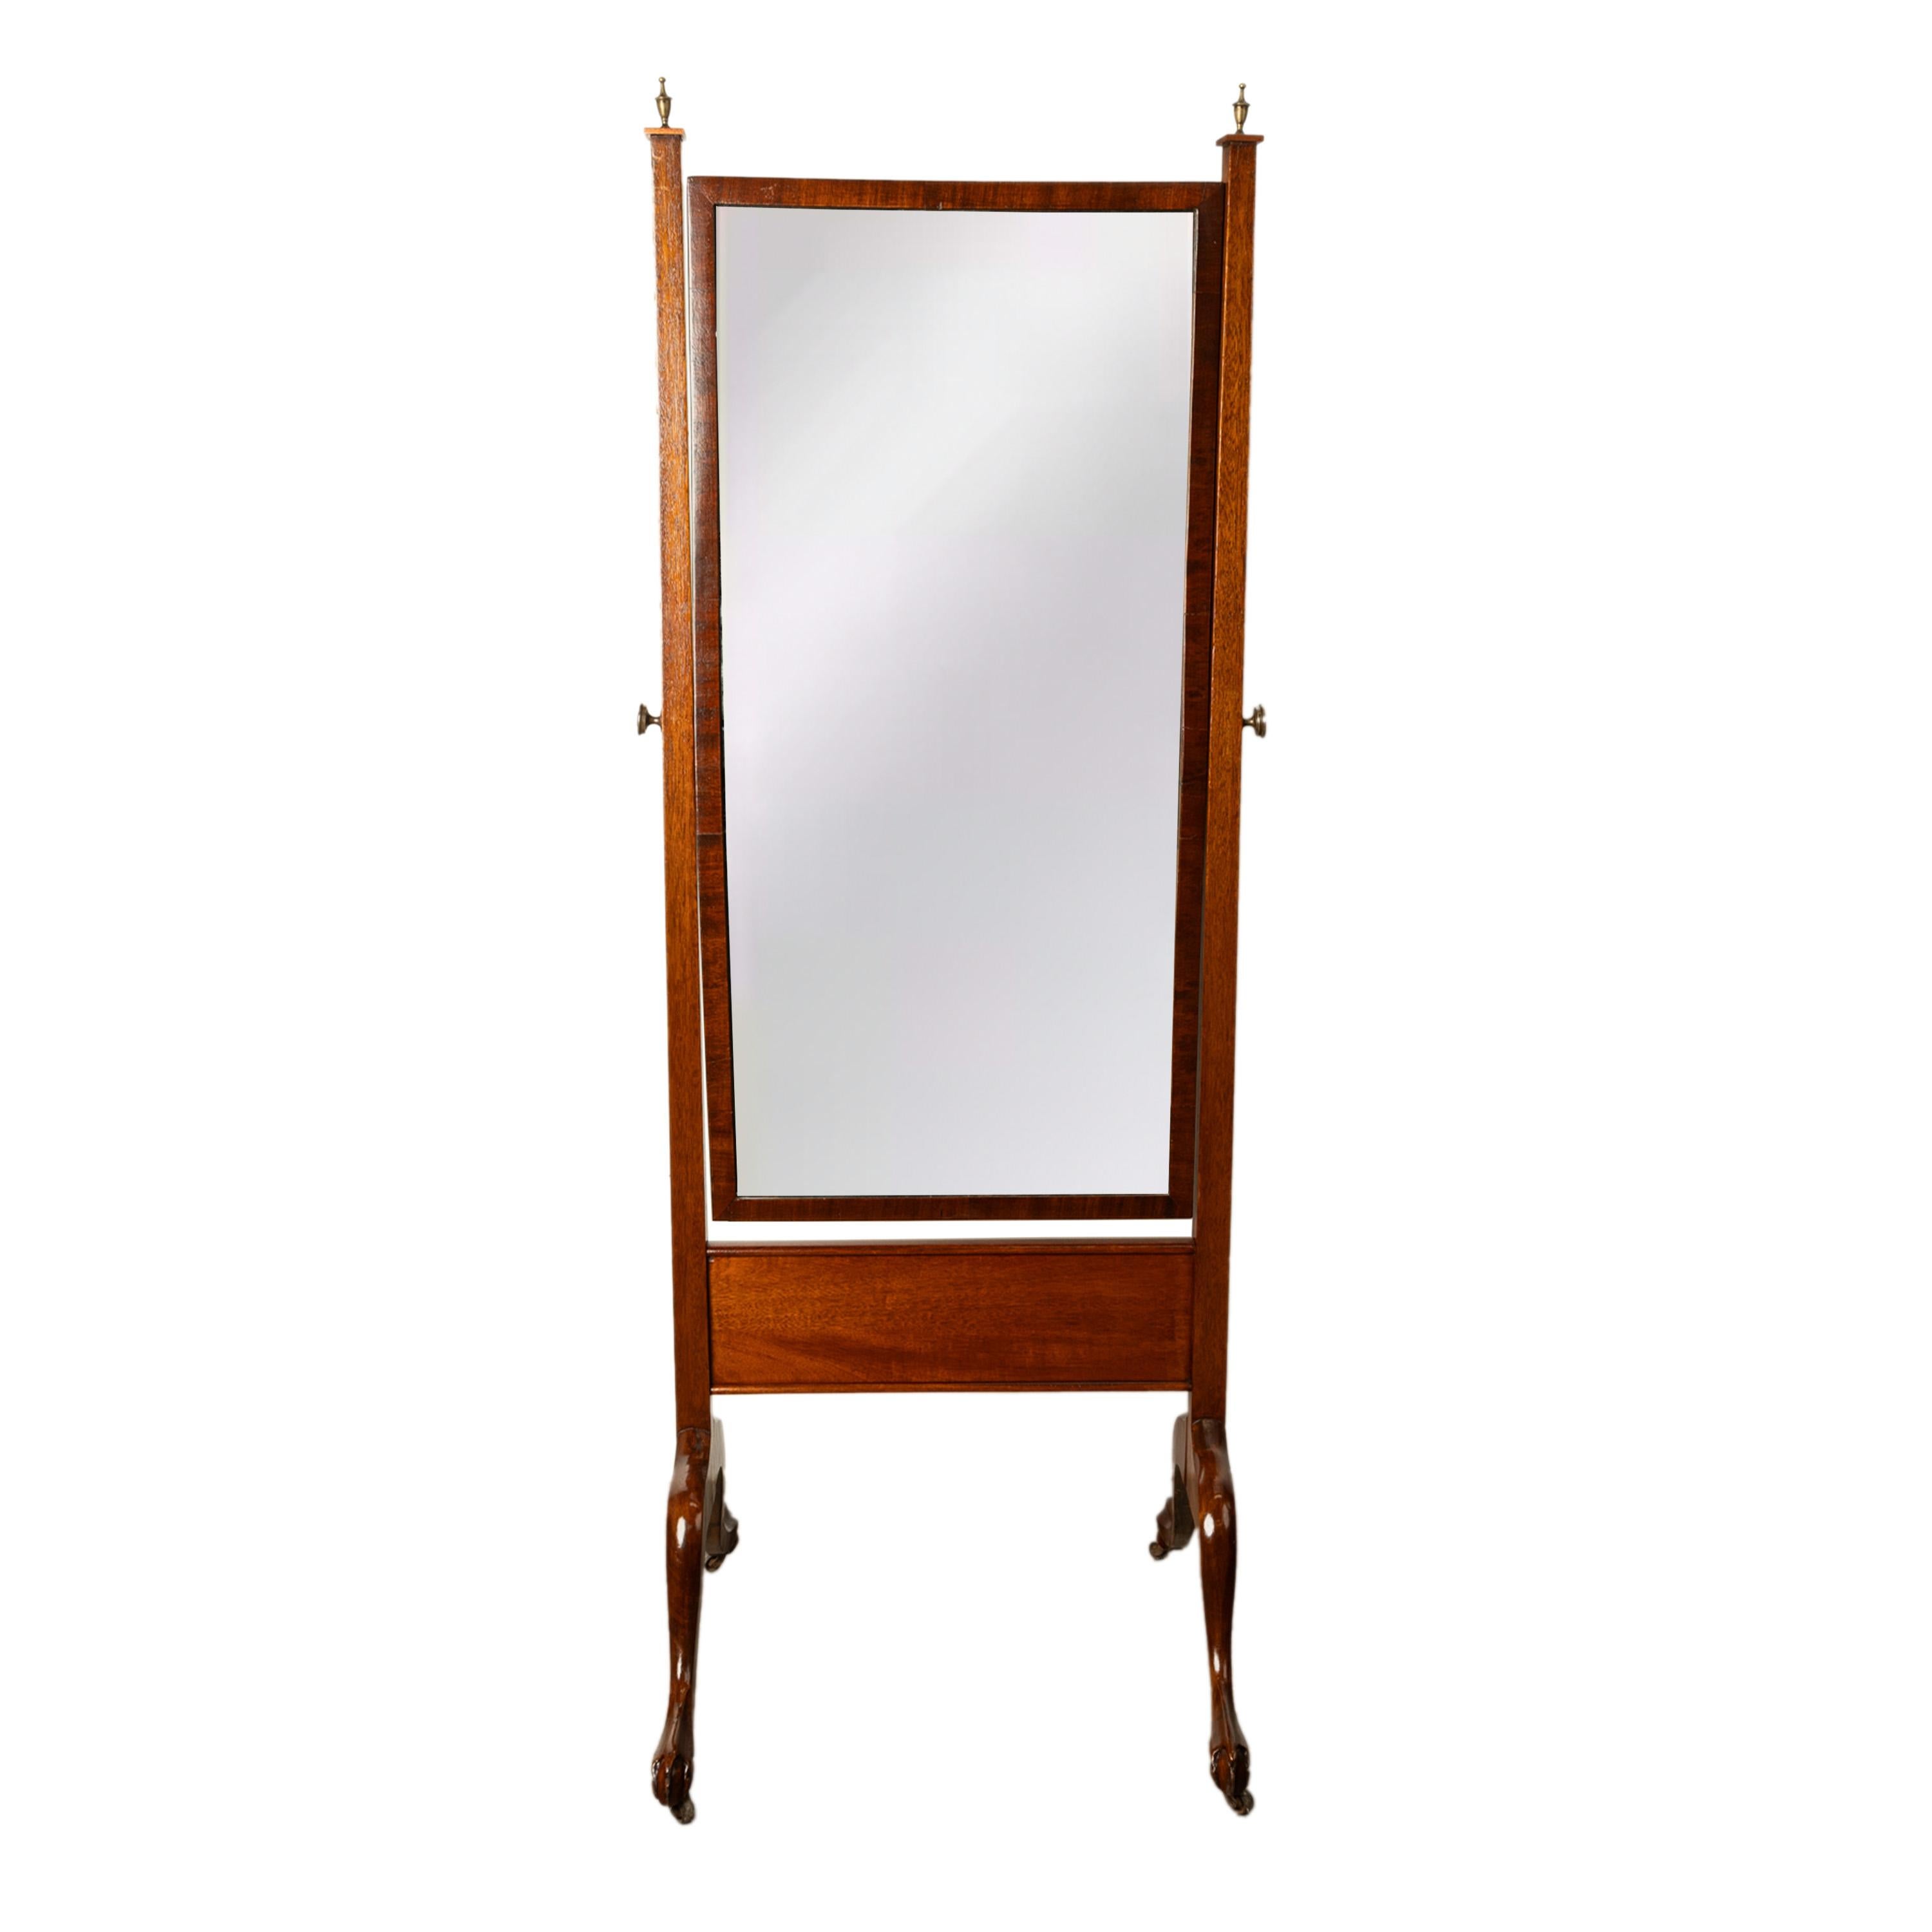 A good antique Georgian Regency mahogany cheval mirror, circa 1820.
The mirror having a pair of brass urn shaped finials to the top of the upright supports, to the center is a swing mirror, the mirror plate seems to be original. The mirror can be